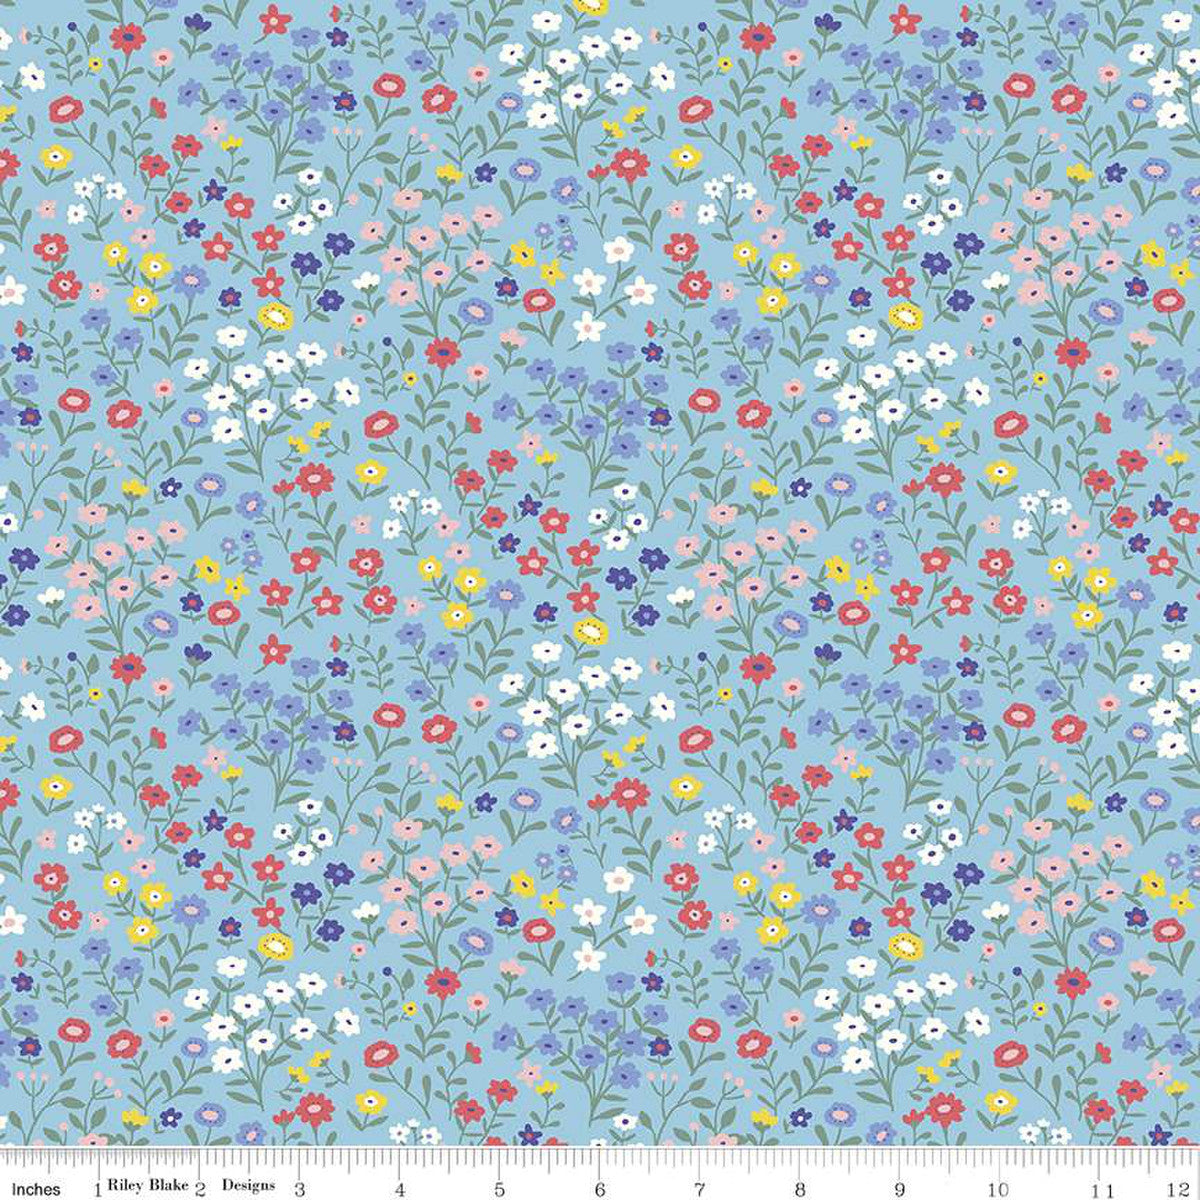 Flannel Floral Blue Designer Flannel by Riley Blake - Sold by the 1/4yd